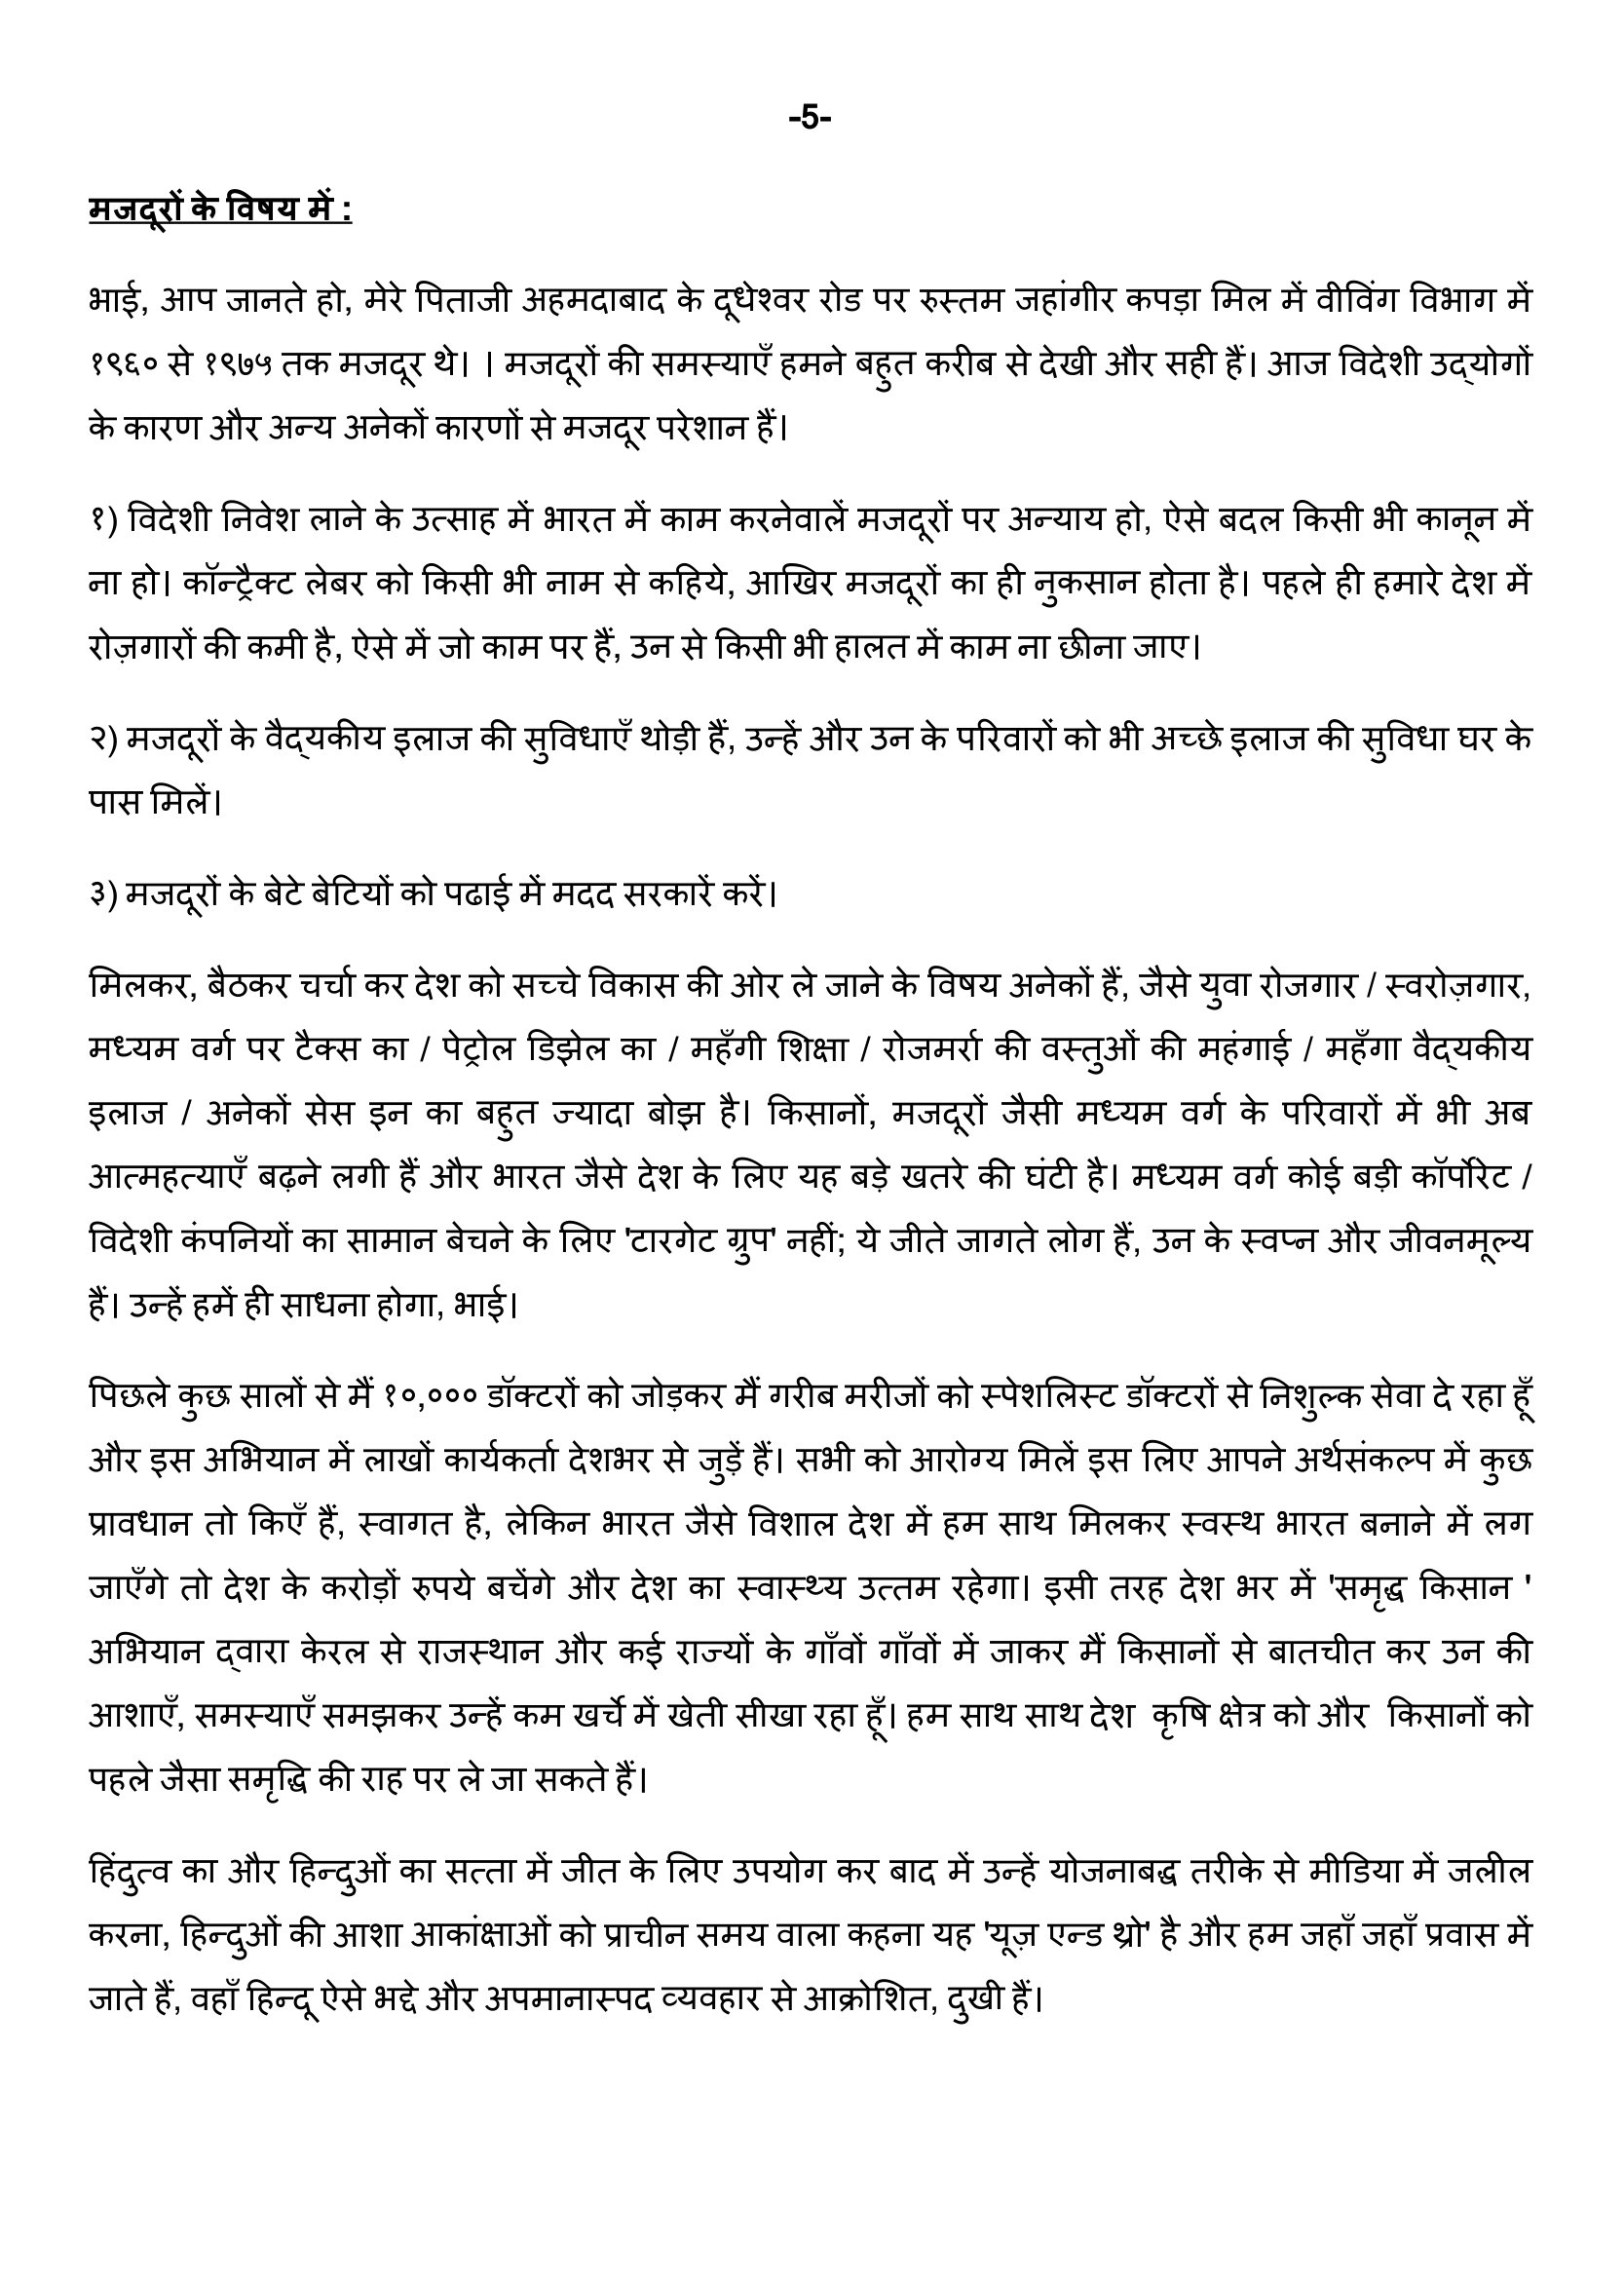 Dr Pravin Togadia on X: Last 2 pages of my letter to PM Modi ji